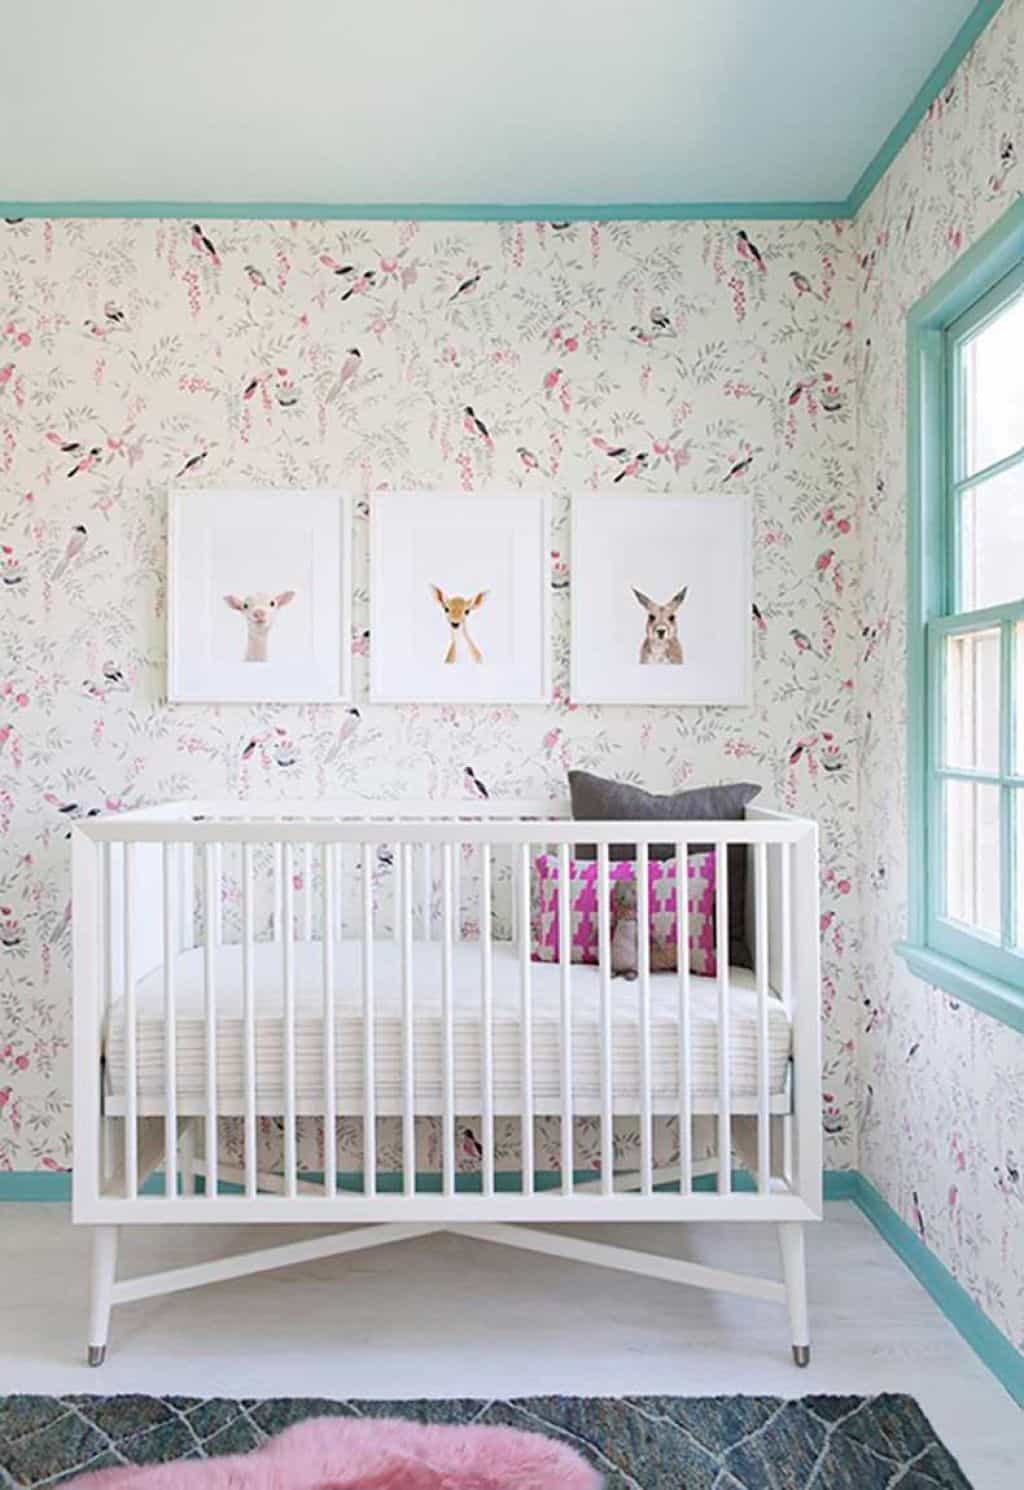 Baby Room With Nursery Wallpaper And White Crib - 3 Pictures Above Crib , HD Wallpaper & Backgrounds